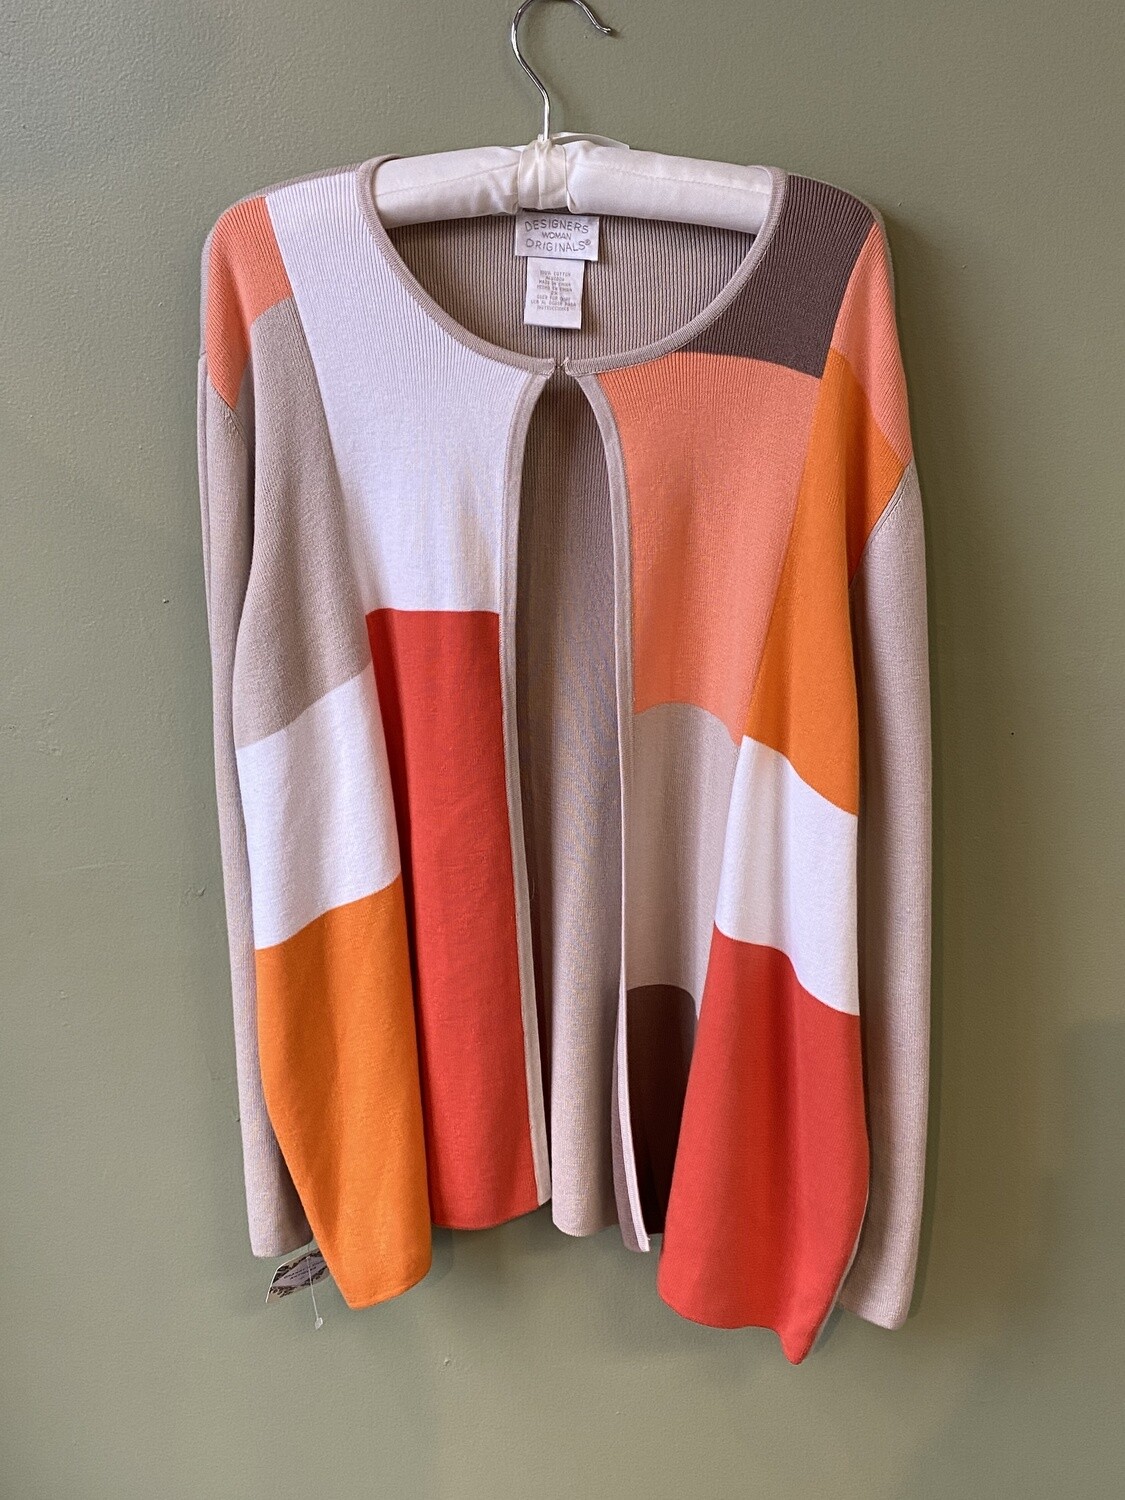 Designers ORIGINALS Cotton Sweater with Color-block Front and Single-Color Back, Size XL